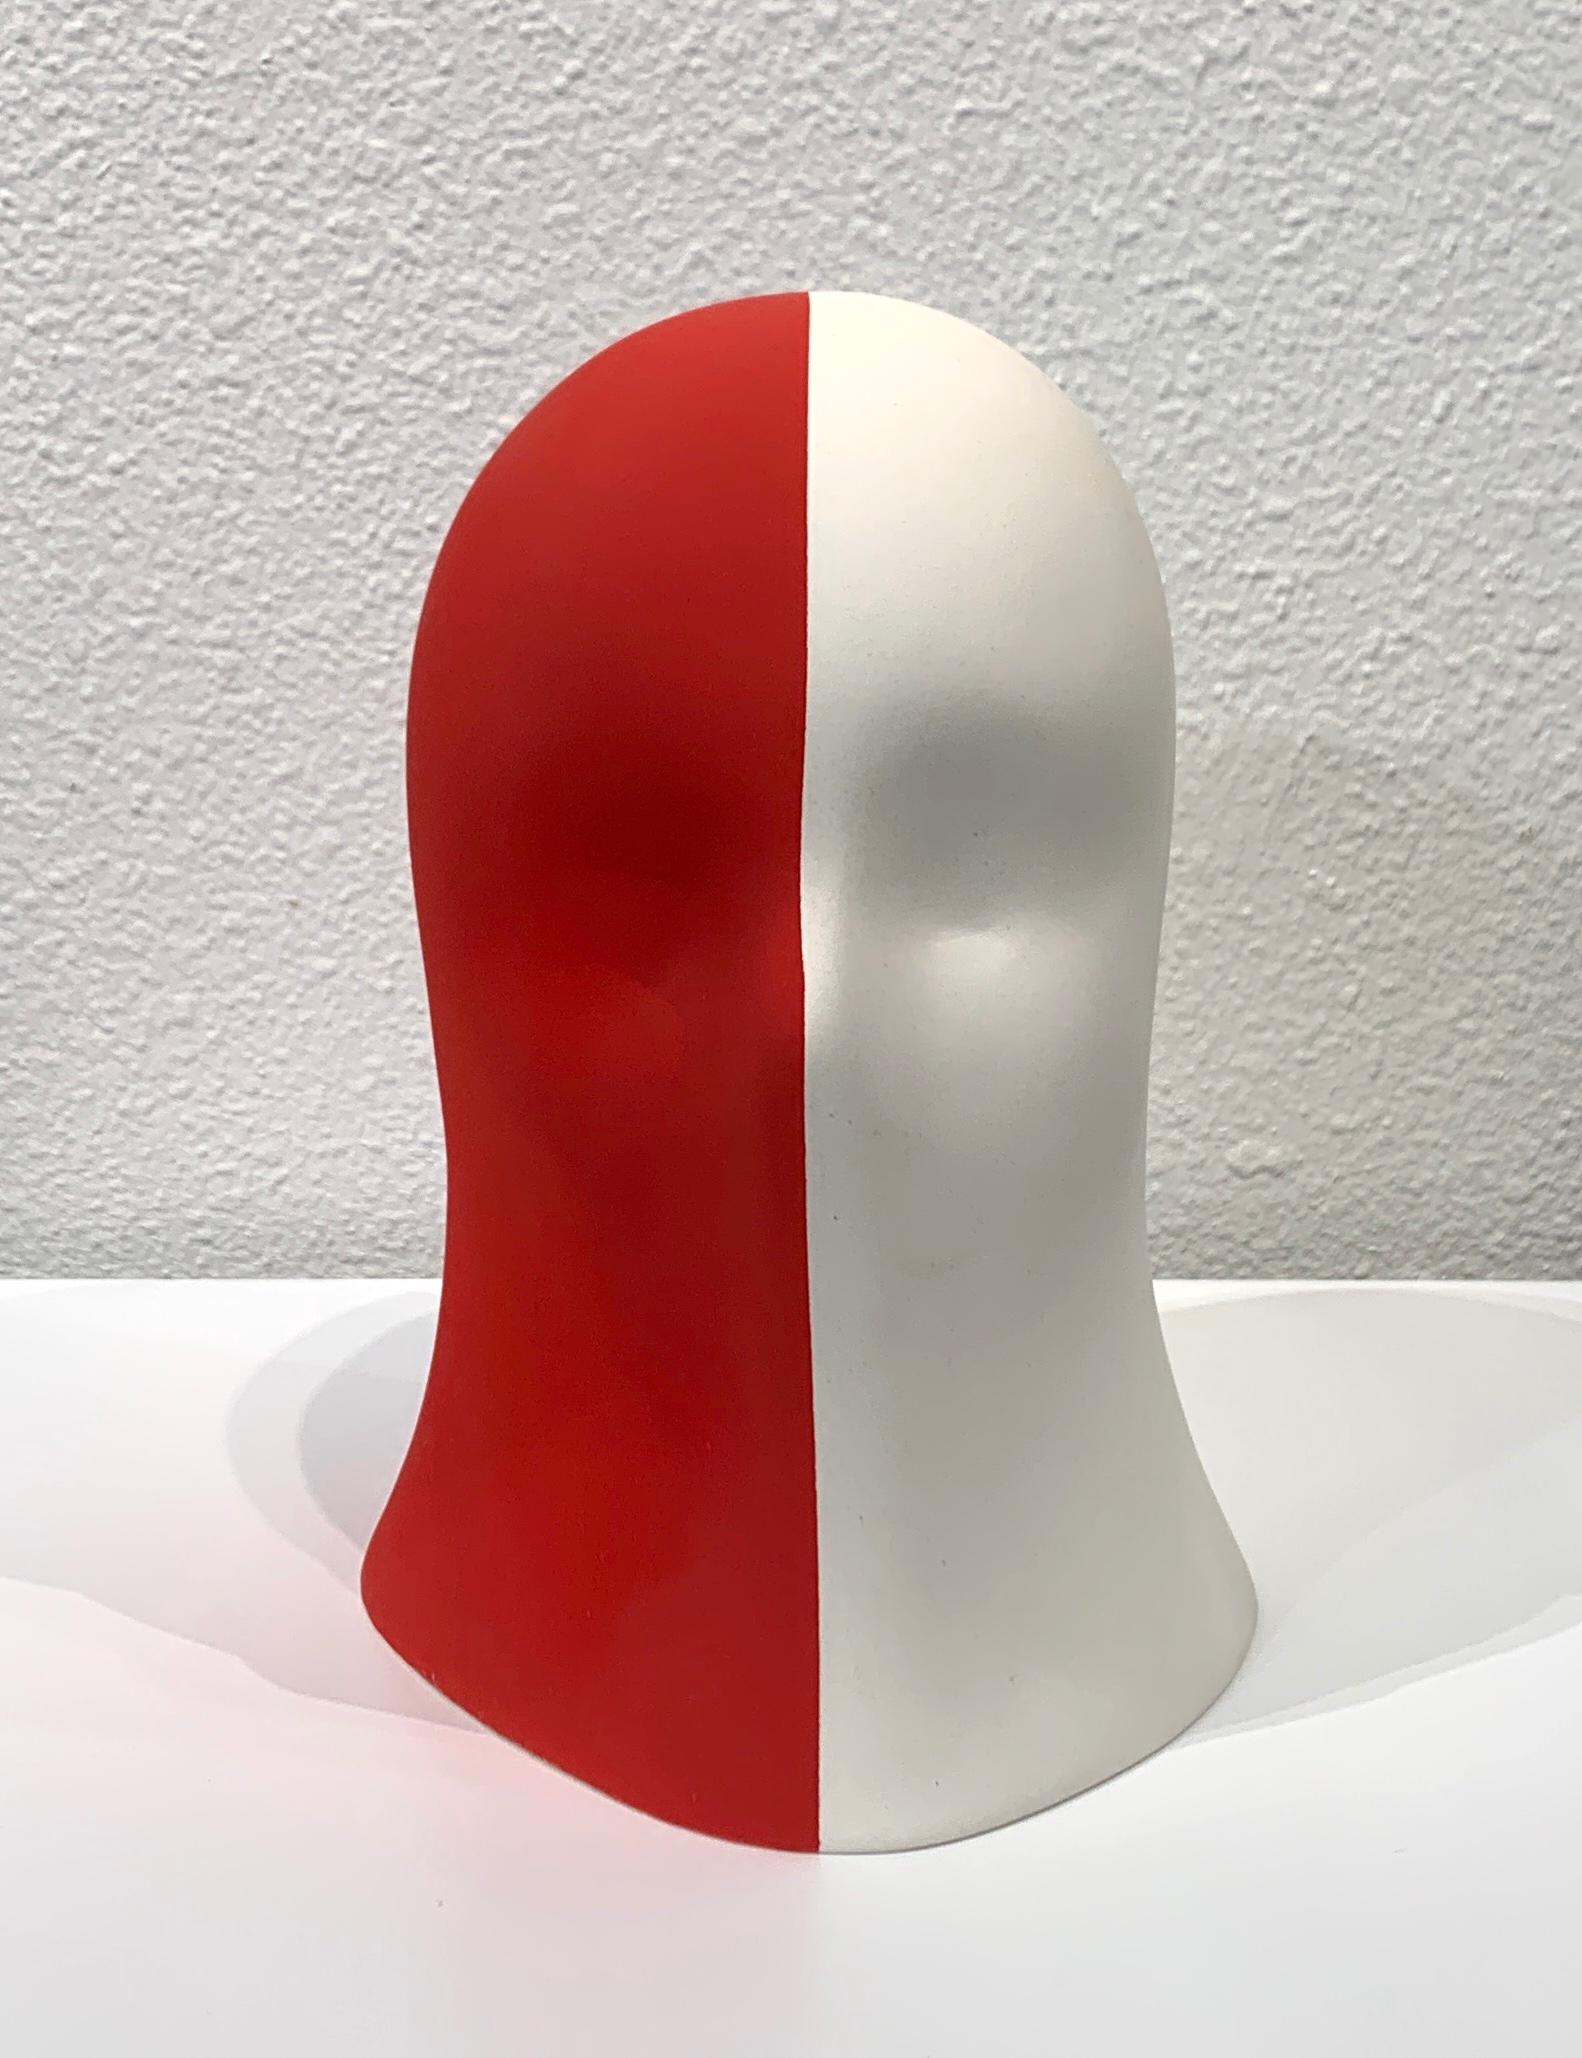 Red/White Veil - Sculpture by Chloe Rizzo